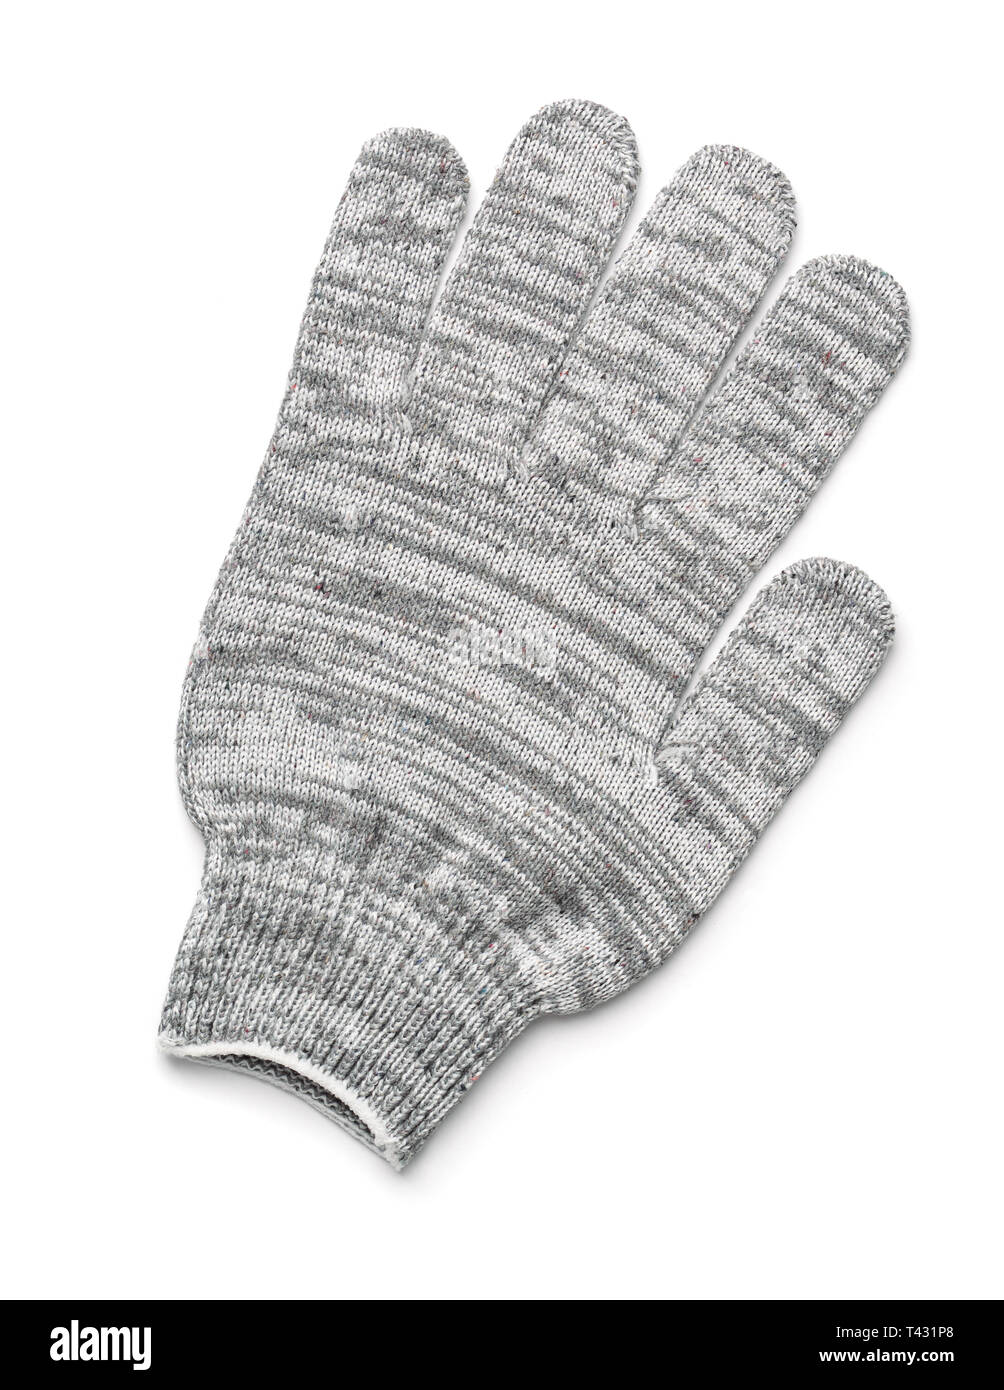 Top view of gray knitted glove isolated on white Stock Photo